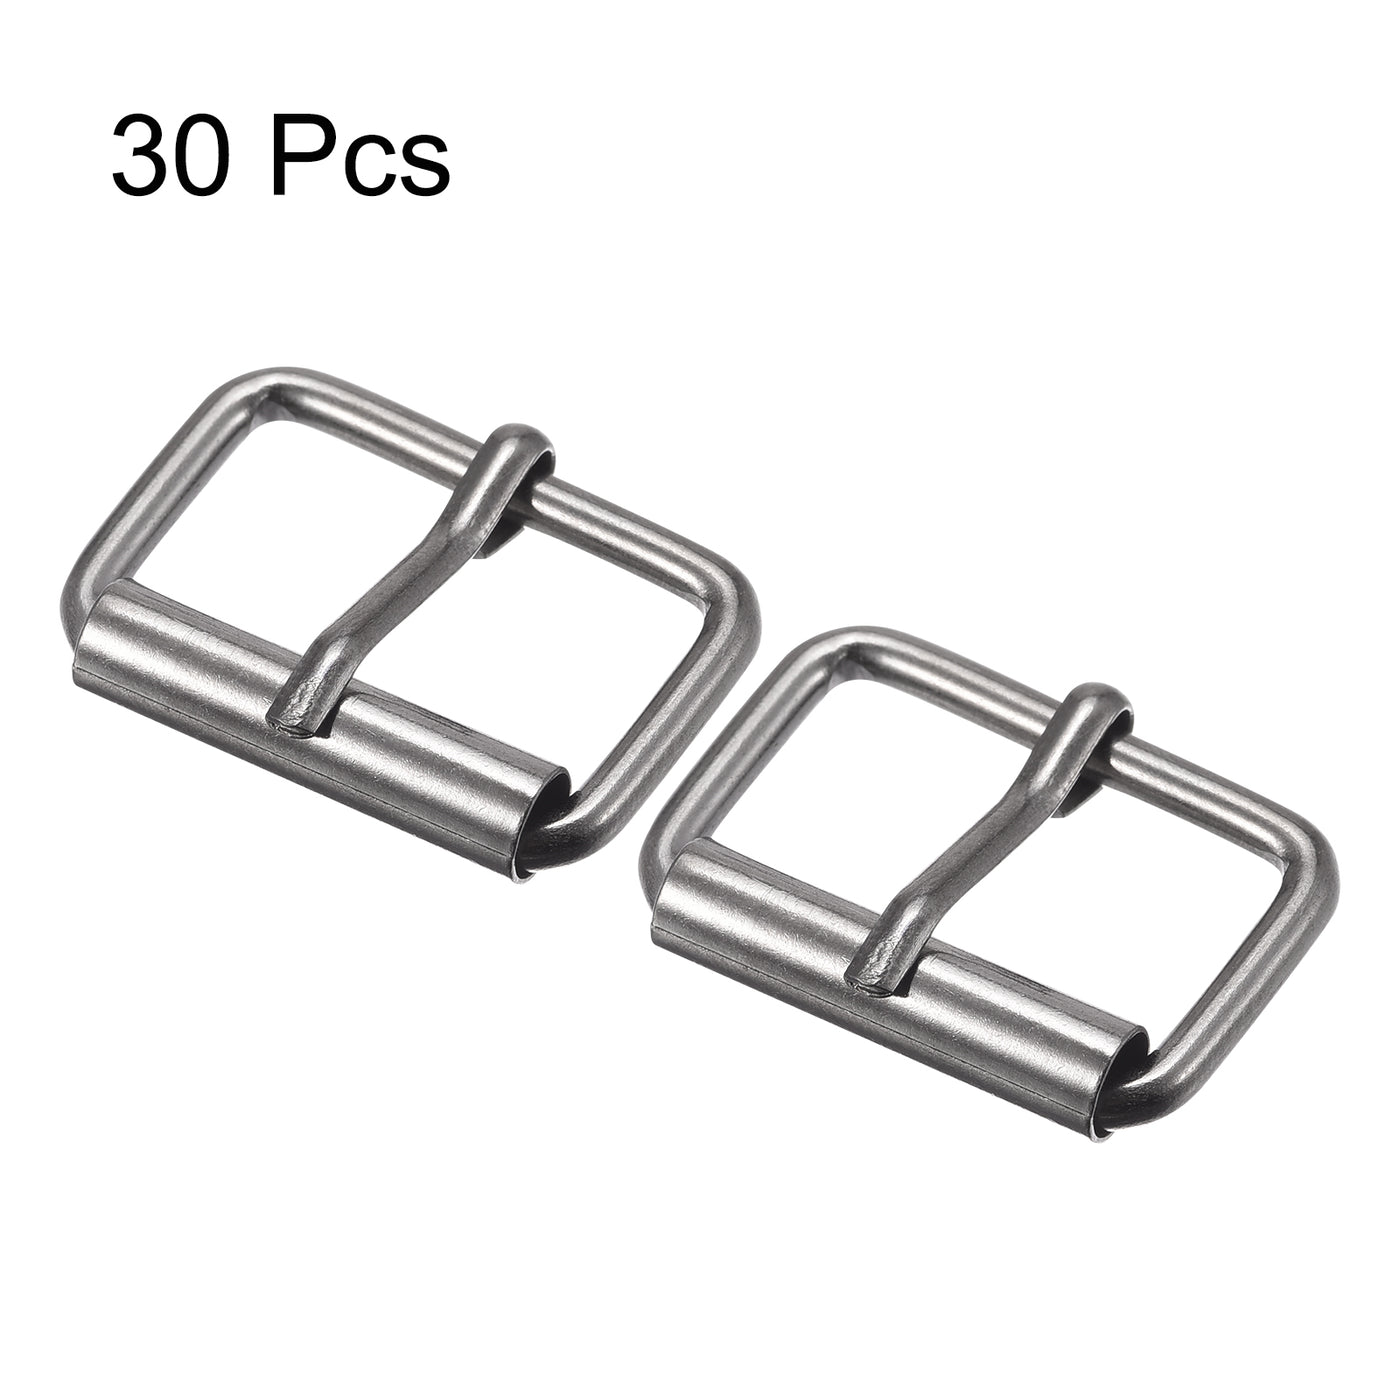 uxcell Uxcell 25mm(0.98") Metal Roller Buckles for Belts Bags Straps DIY Dark Gray 30pcs